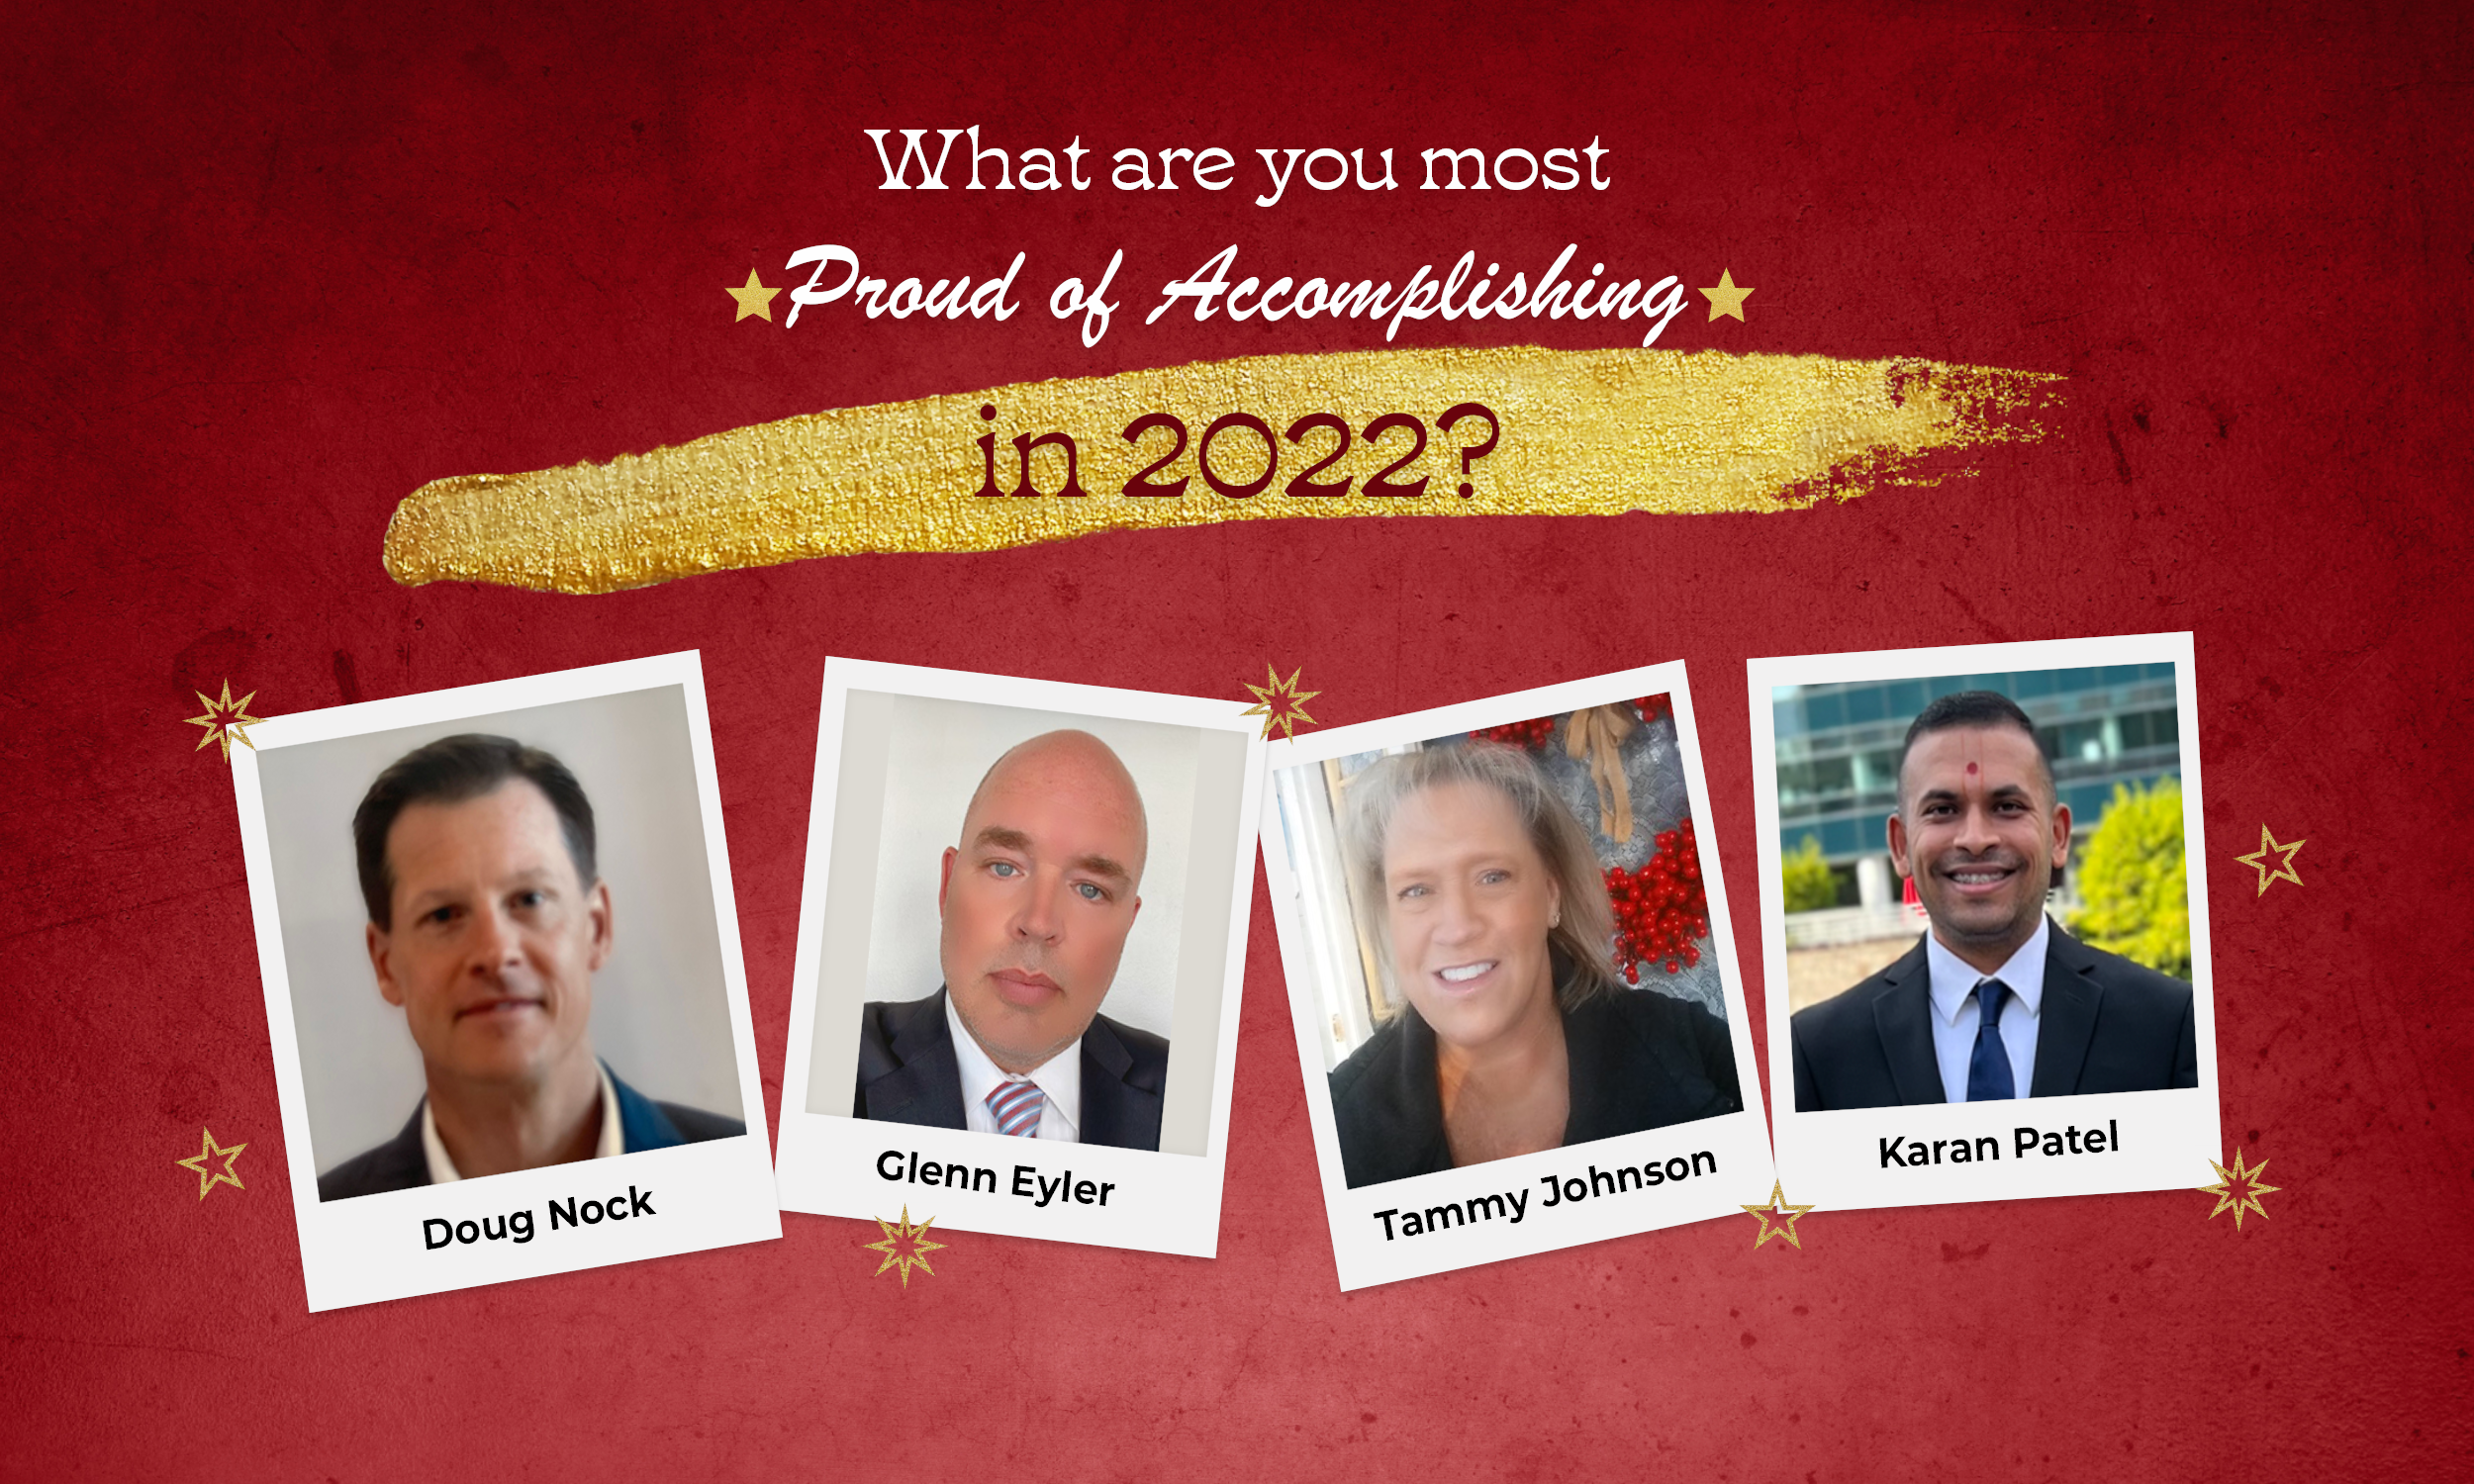 Red banner reading "What are you most proud of accomplishing in 2022?" with photos of OIT staff Doug Nock, Glenn Eyler, Tammy Johnson, and Karan Patel